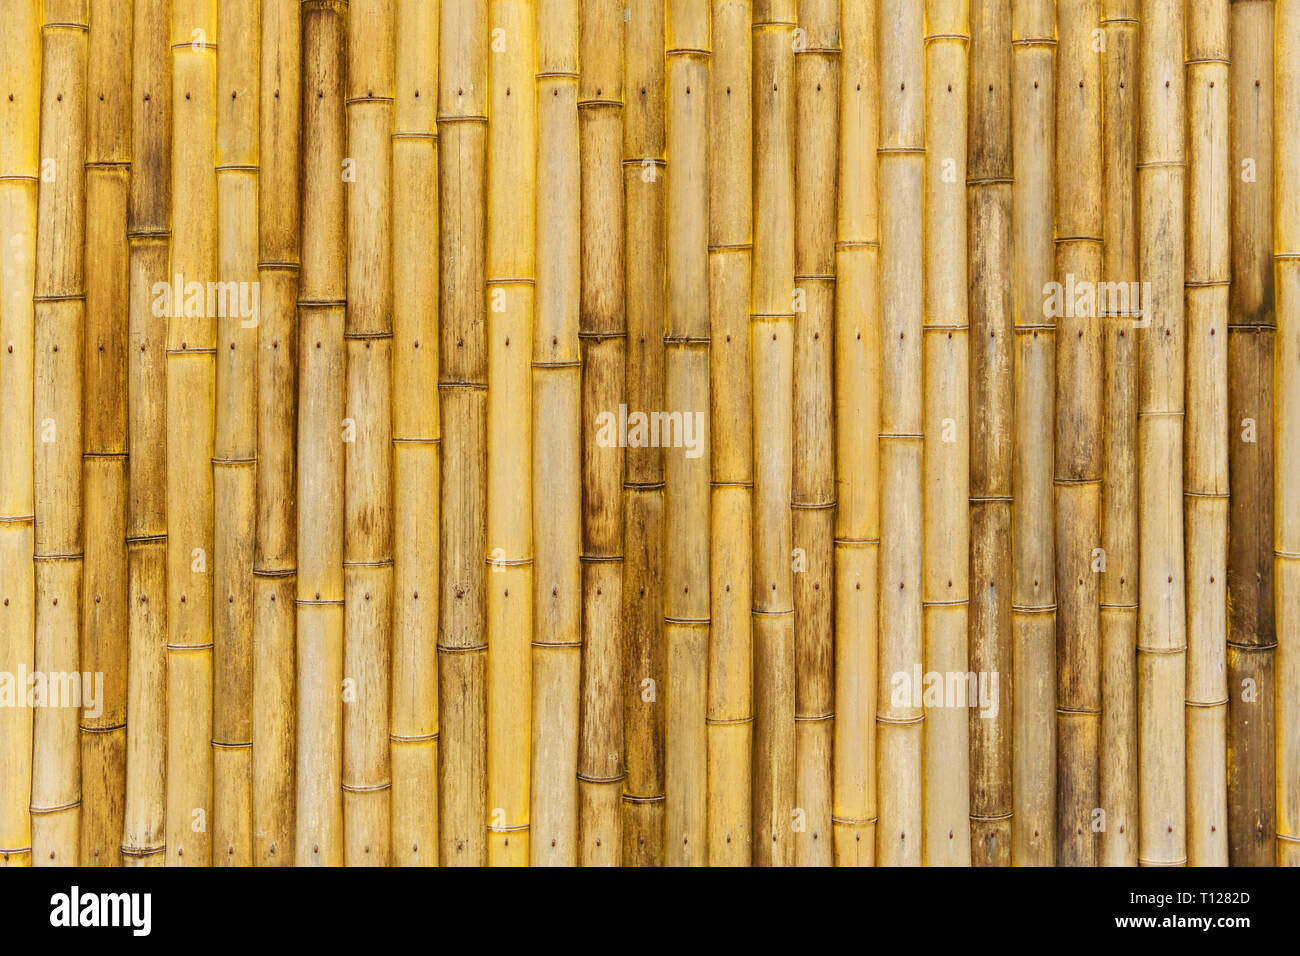 213,501 Bamboo Wood Texture Royalty-Free Images, Stock Photos & Pictures